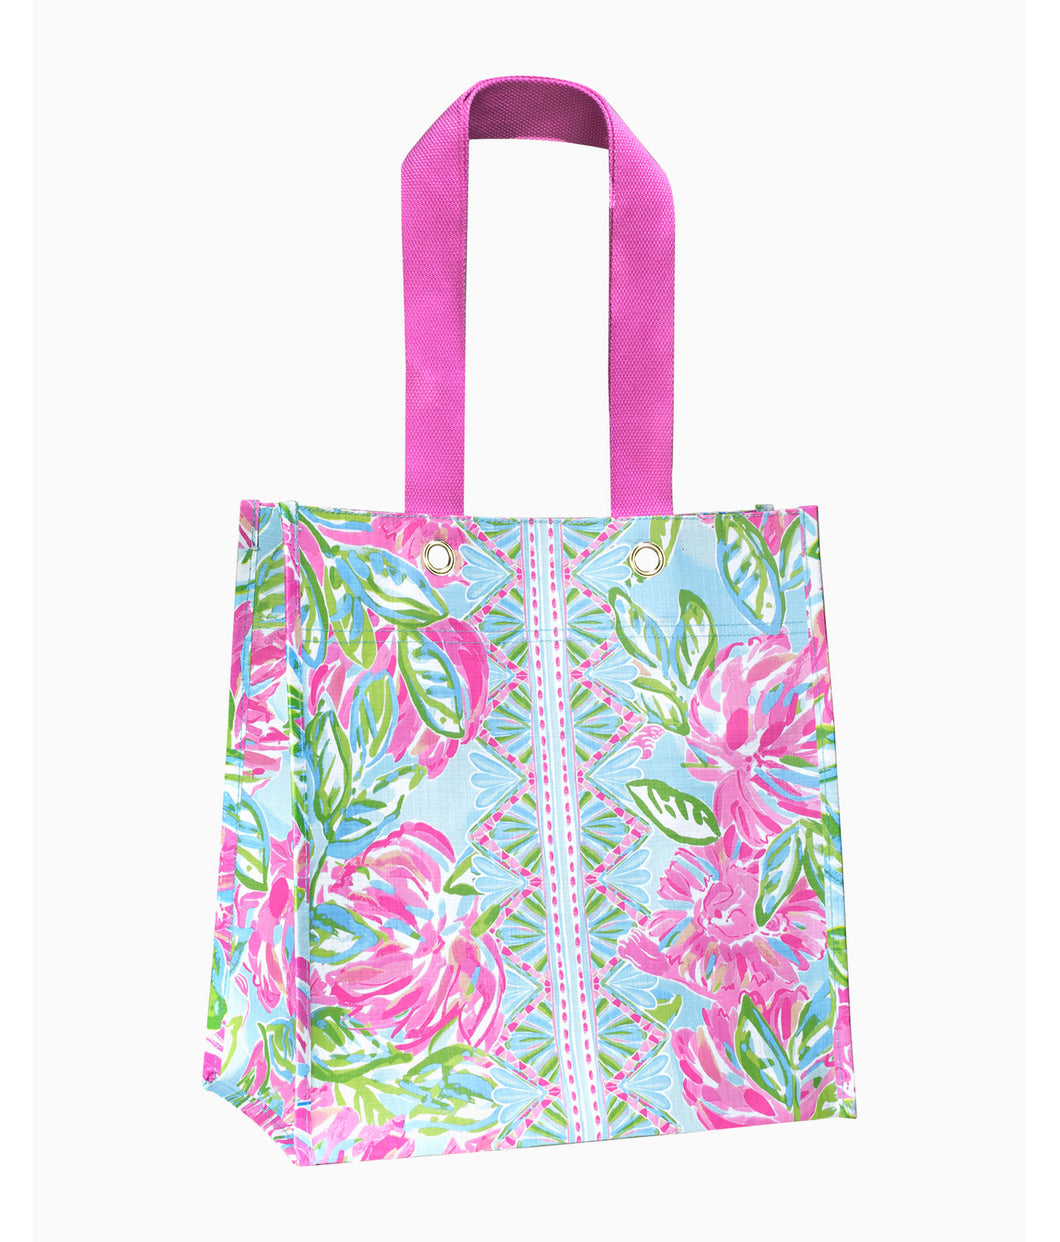 Lilly Pulitzer Market Tote, Totally Blossom